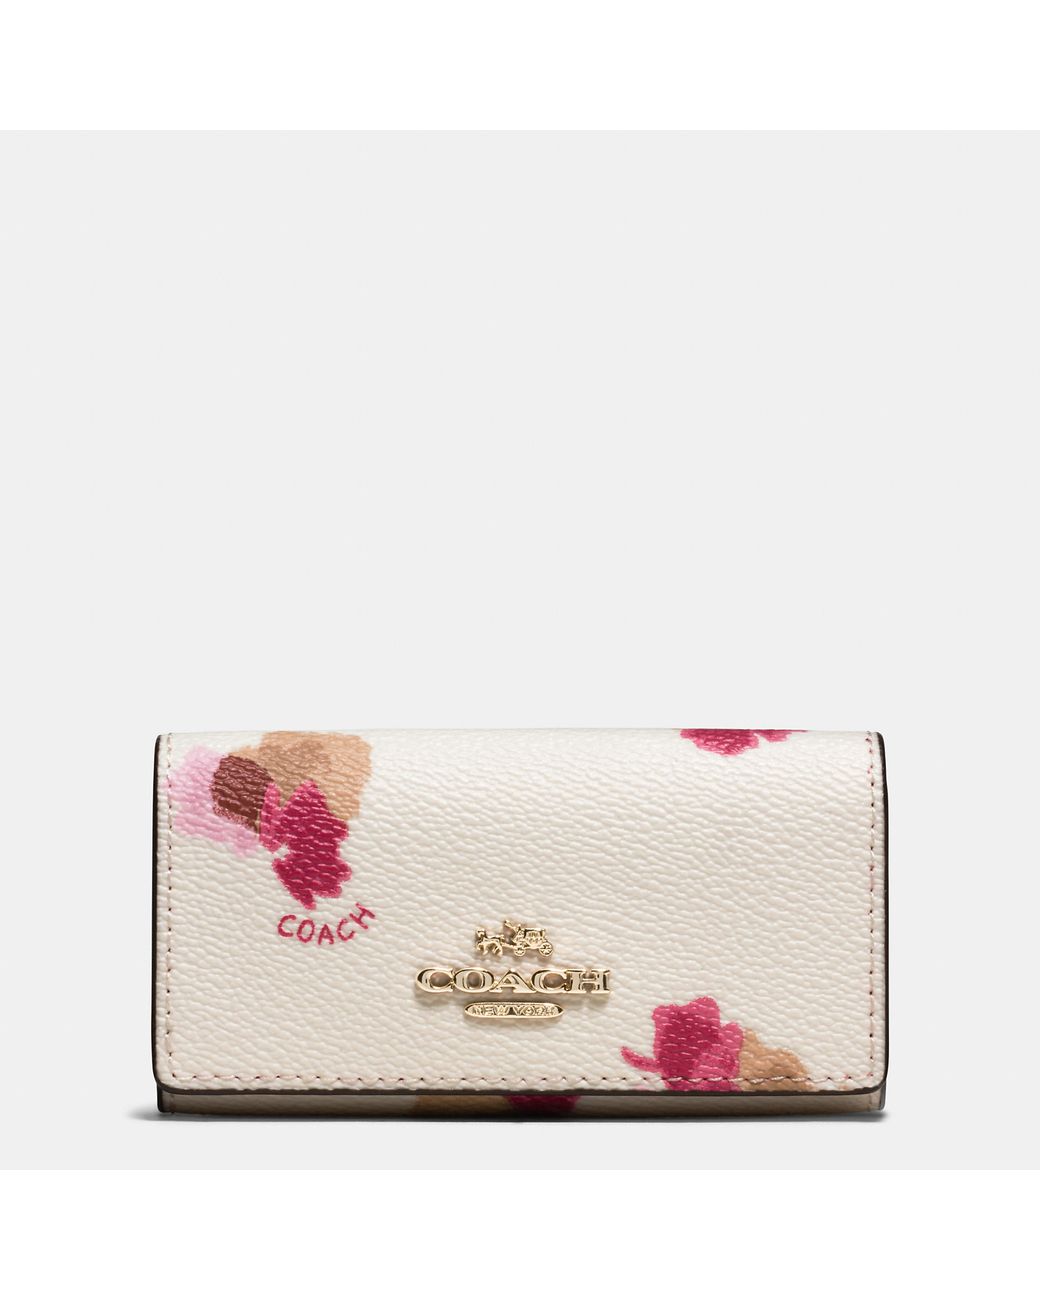 Coach Ivory Floral Six-Ring Pebbled Leather Key Case, Best Price and  Reviews